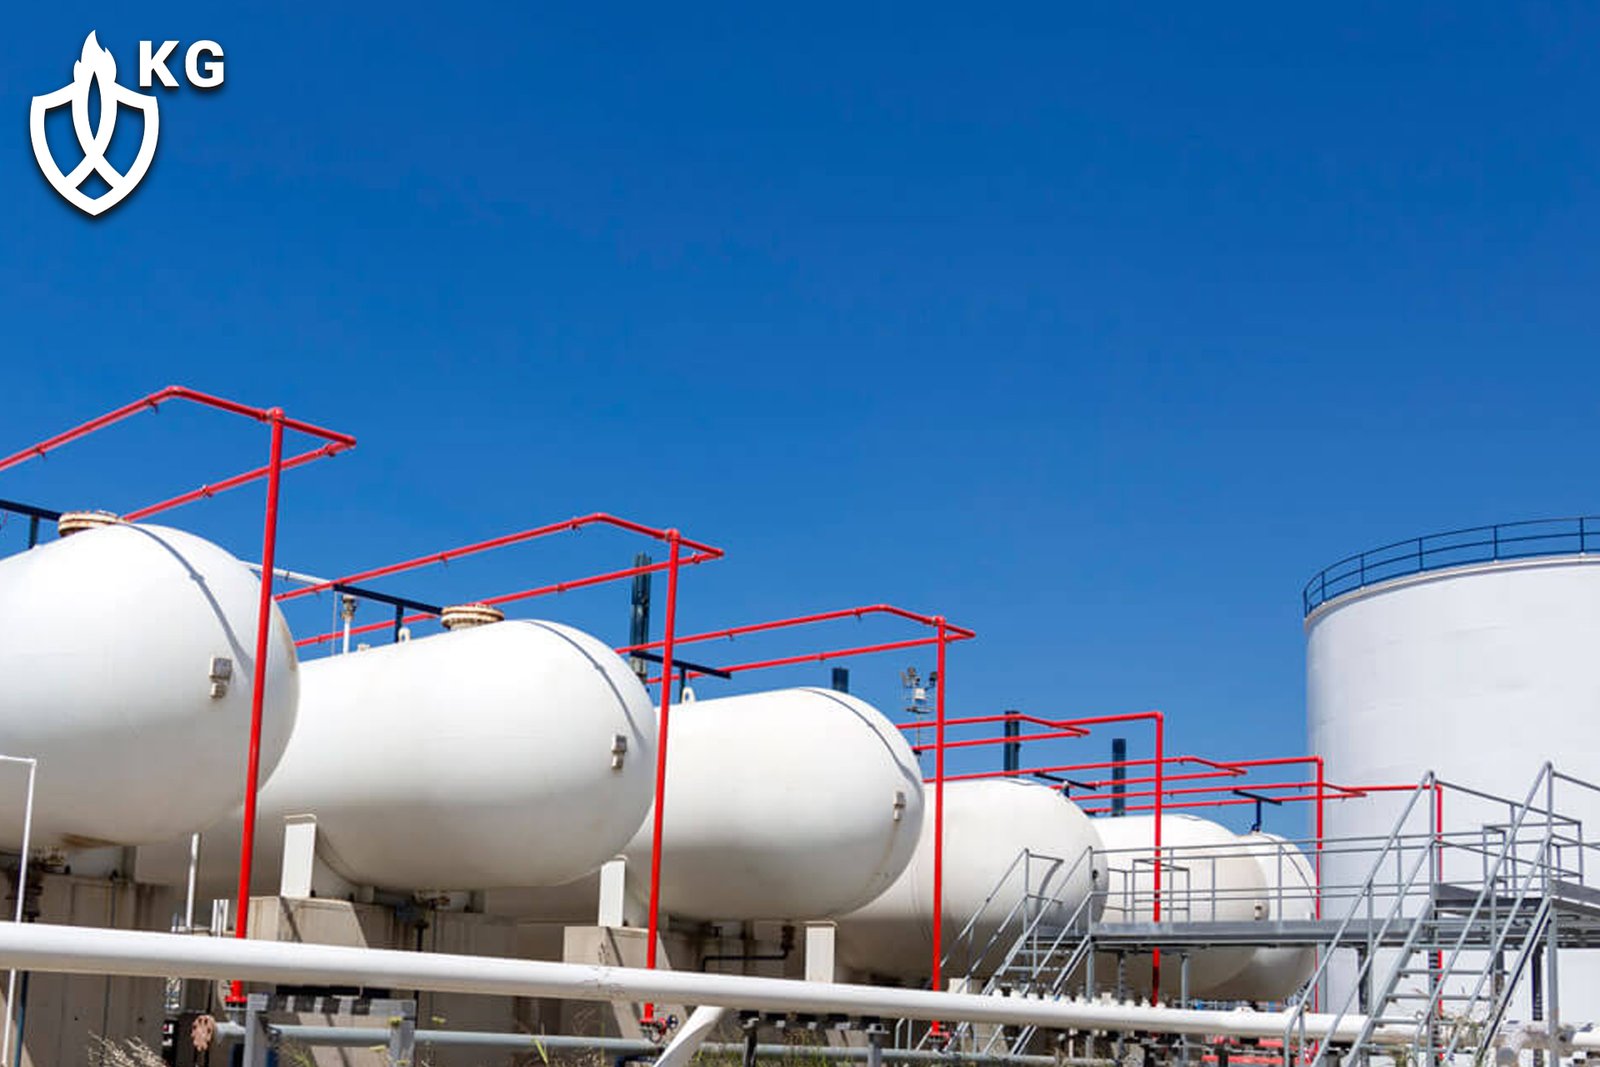 What is liquefied petroleum gas?